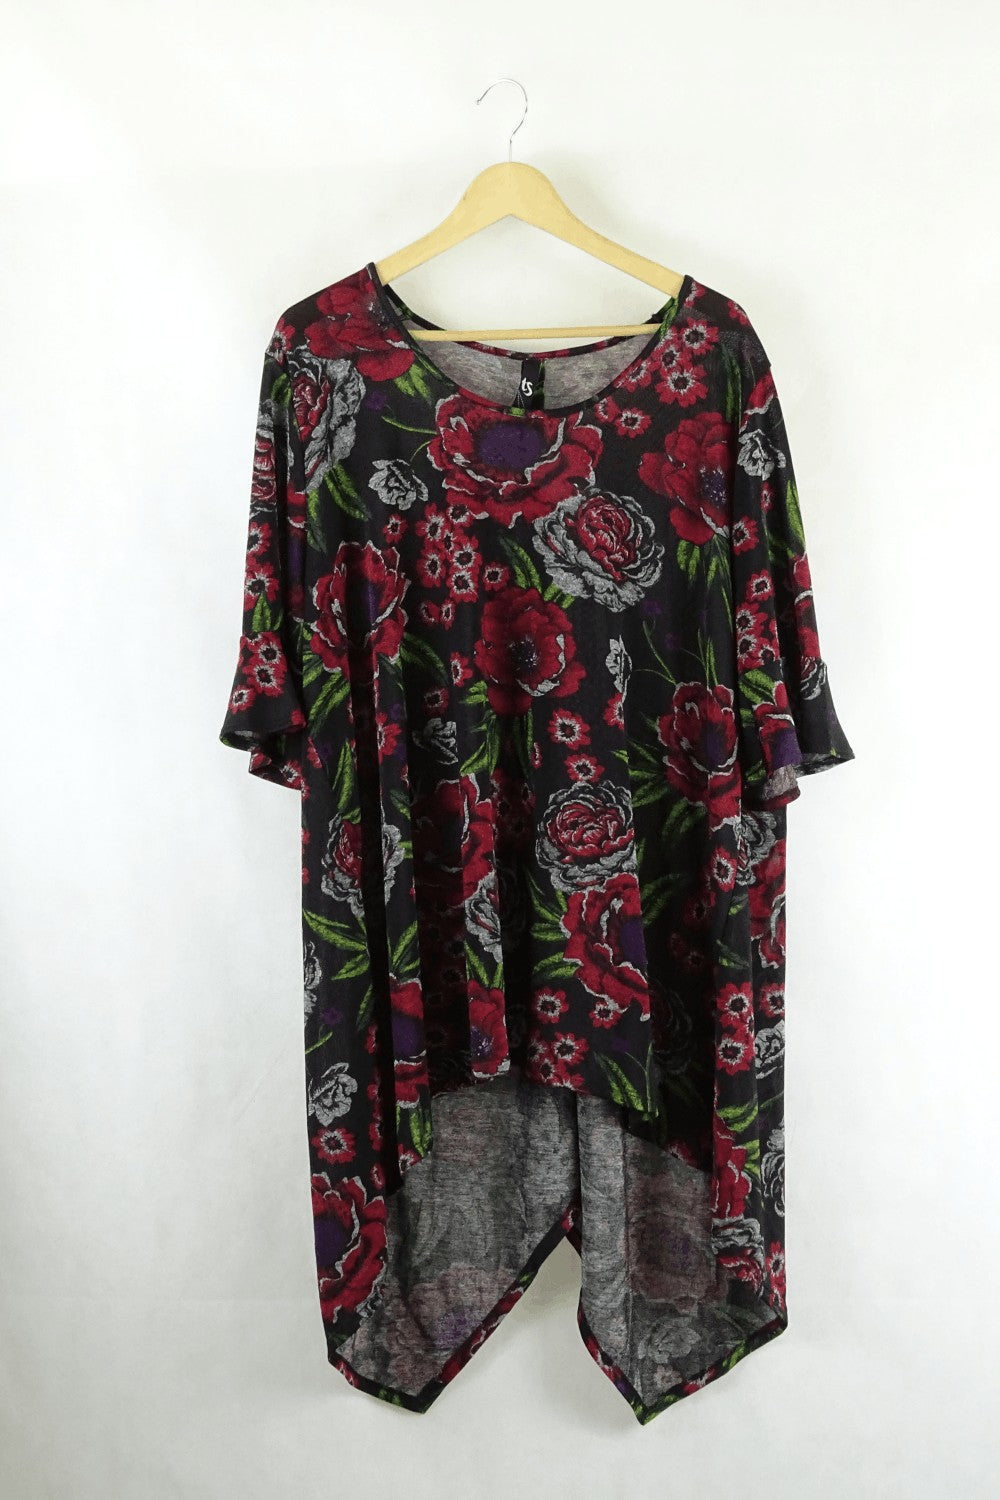 Taking Shape TS Black And Floral Red Roses Top M